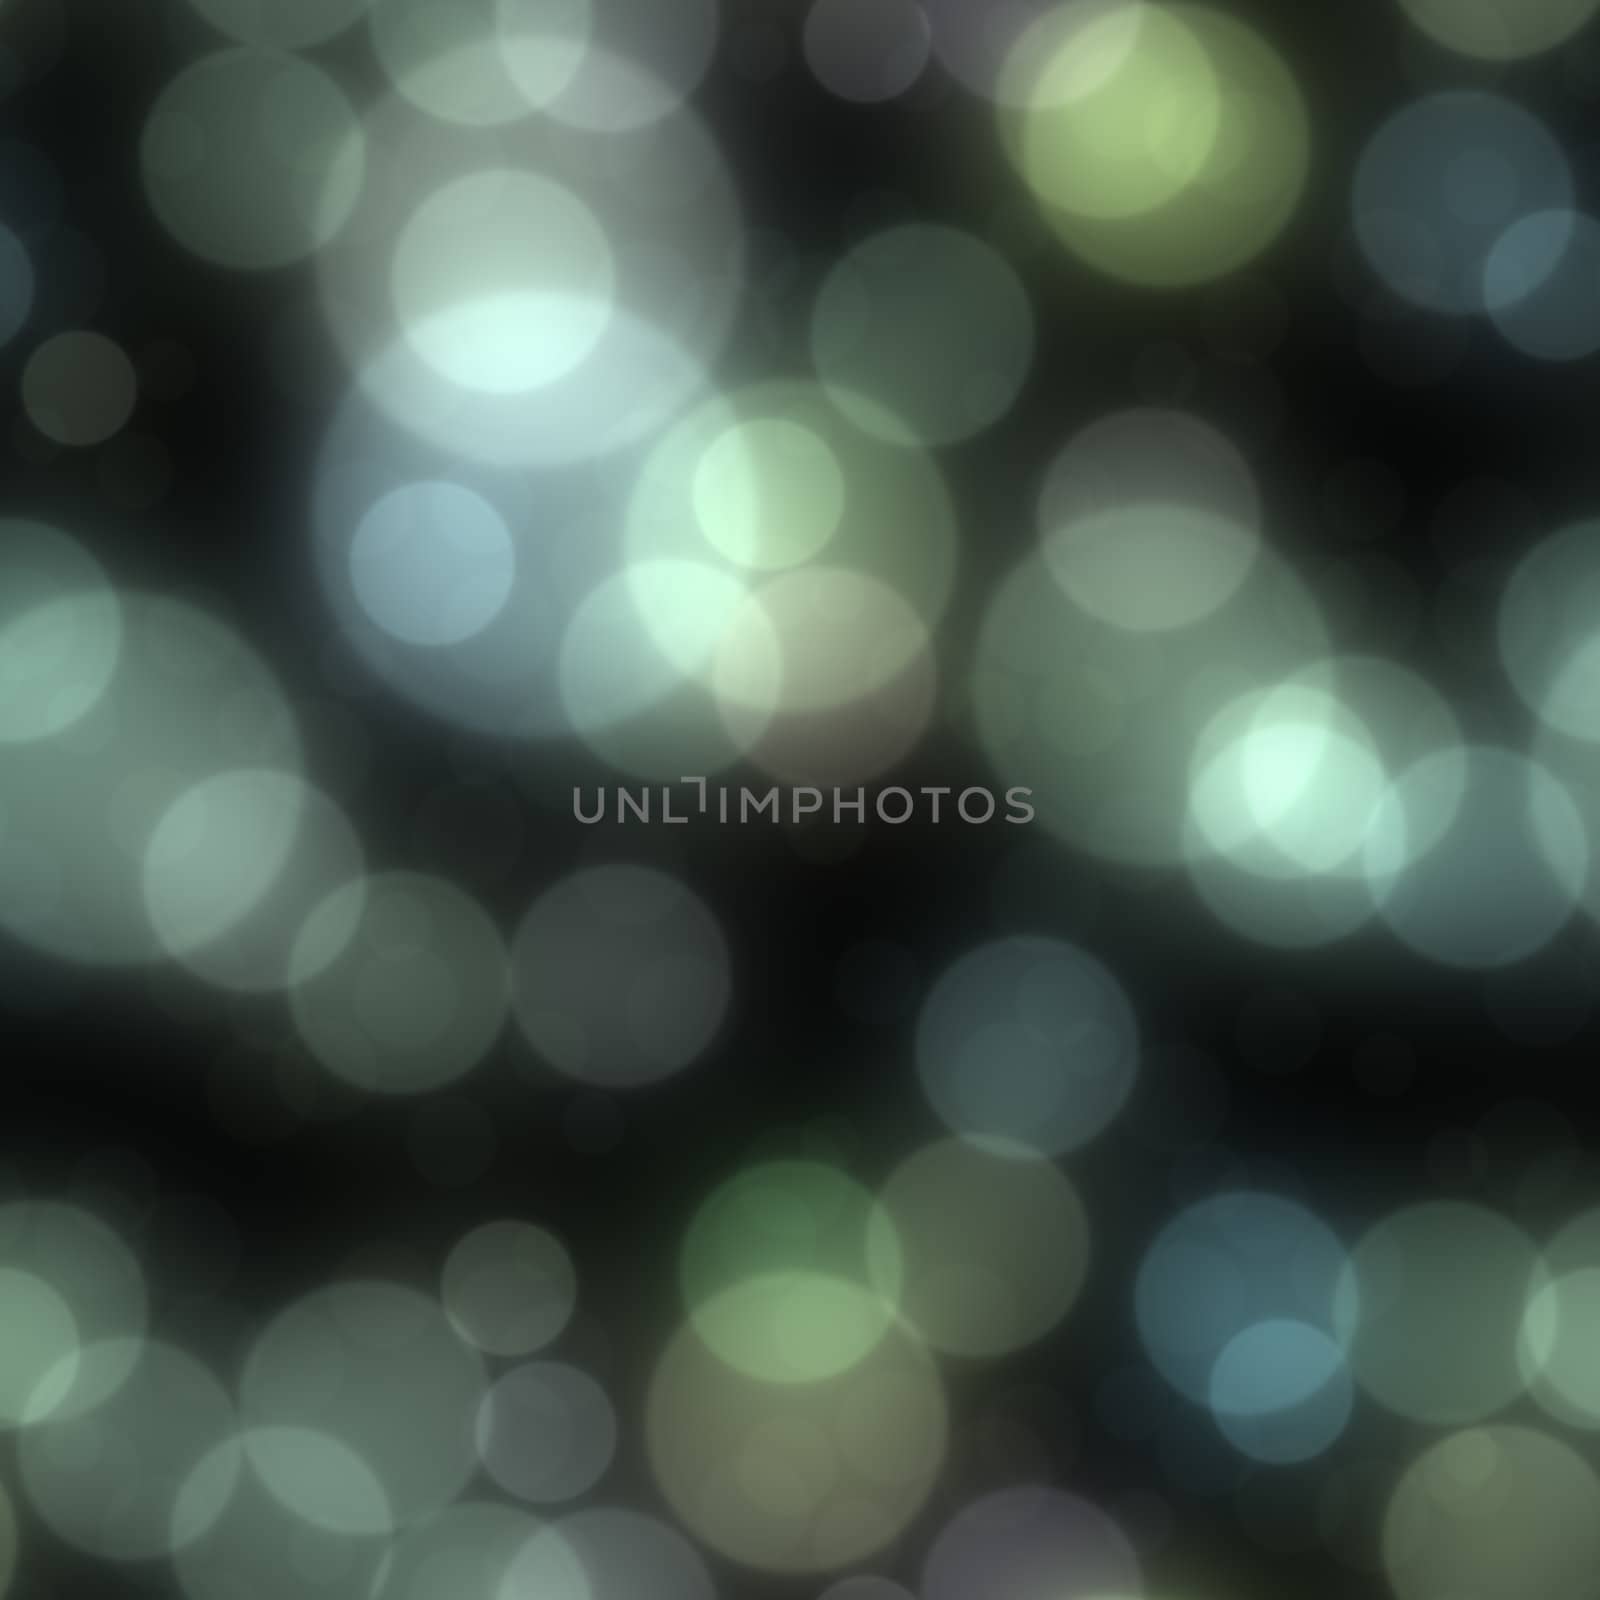 Seamless abstract background with bokeh defocused lights